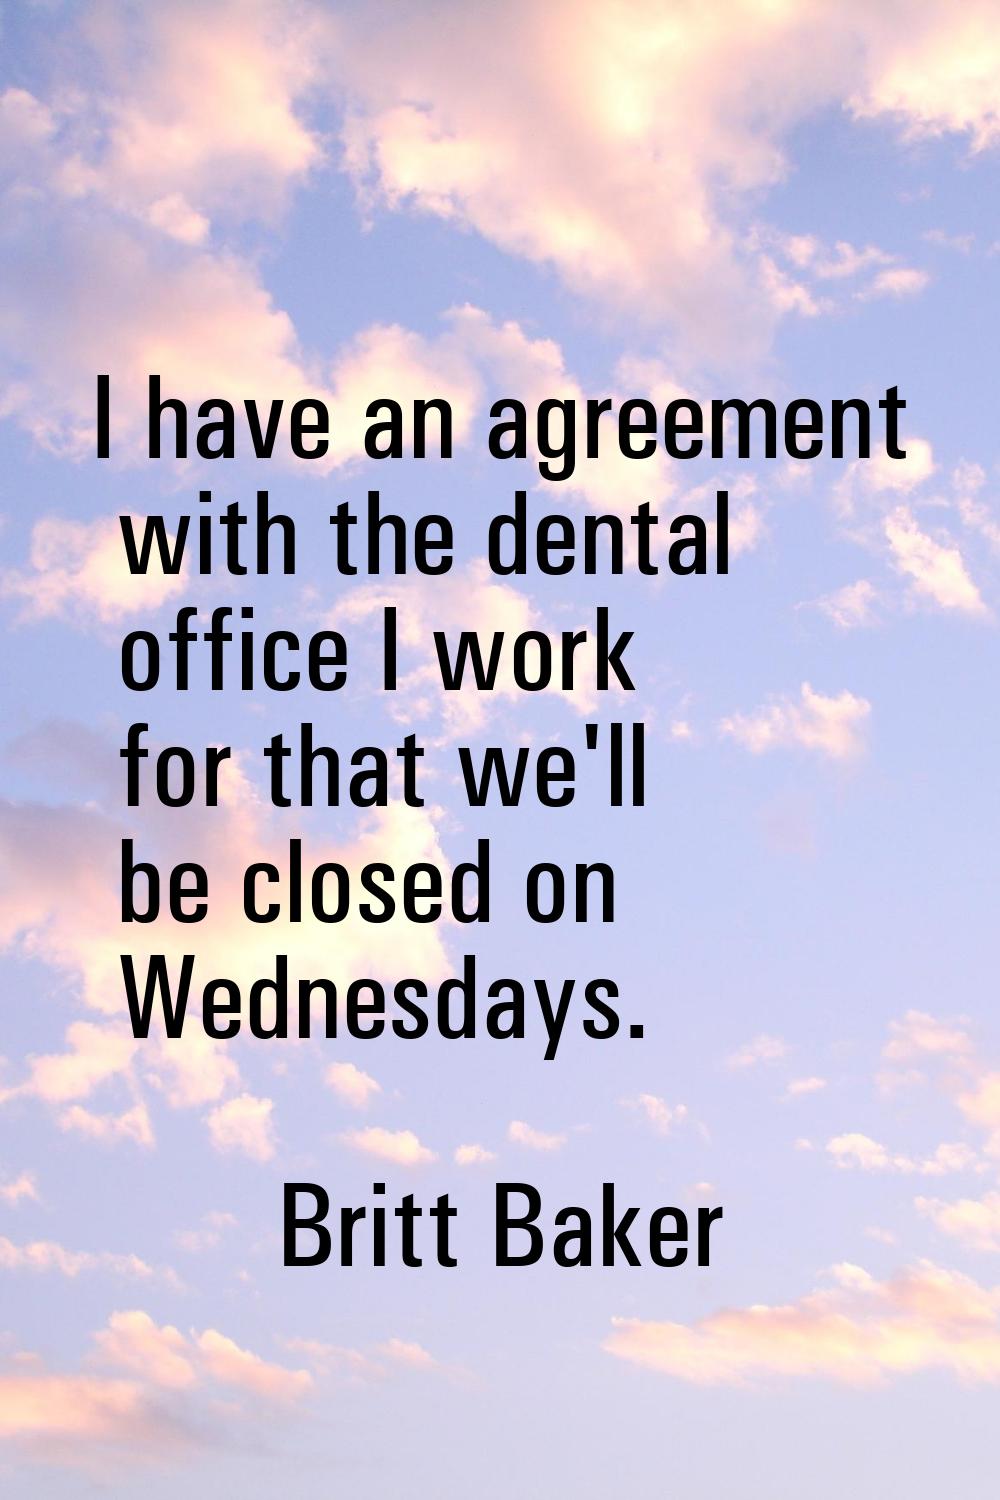 I have an agreement with the dental office I work for that we'll be closed on Wednesdays.